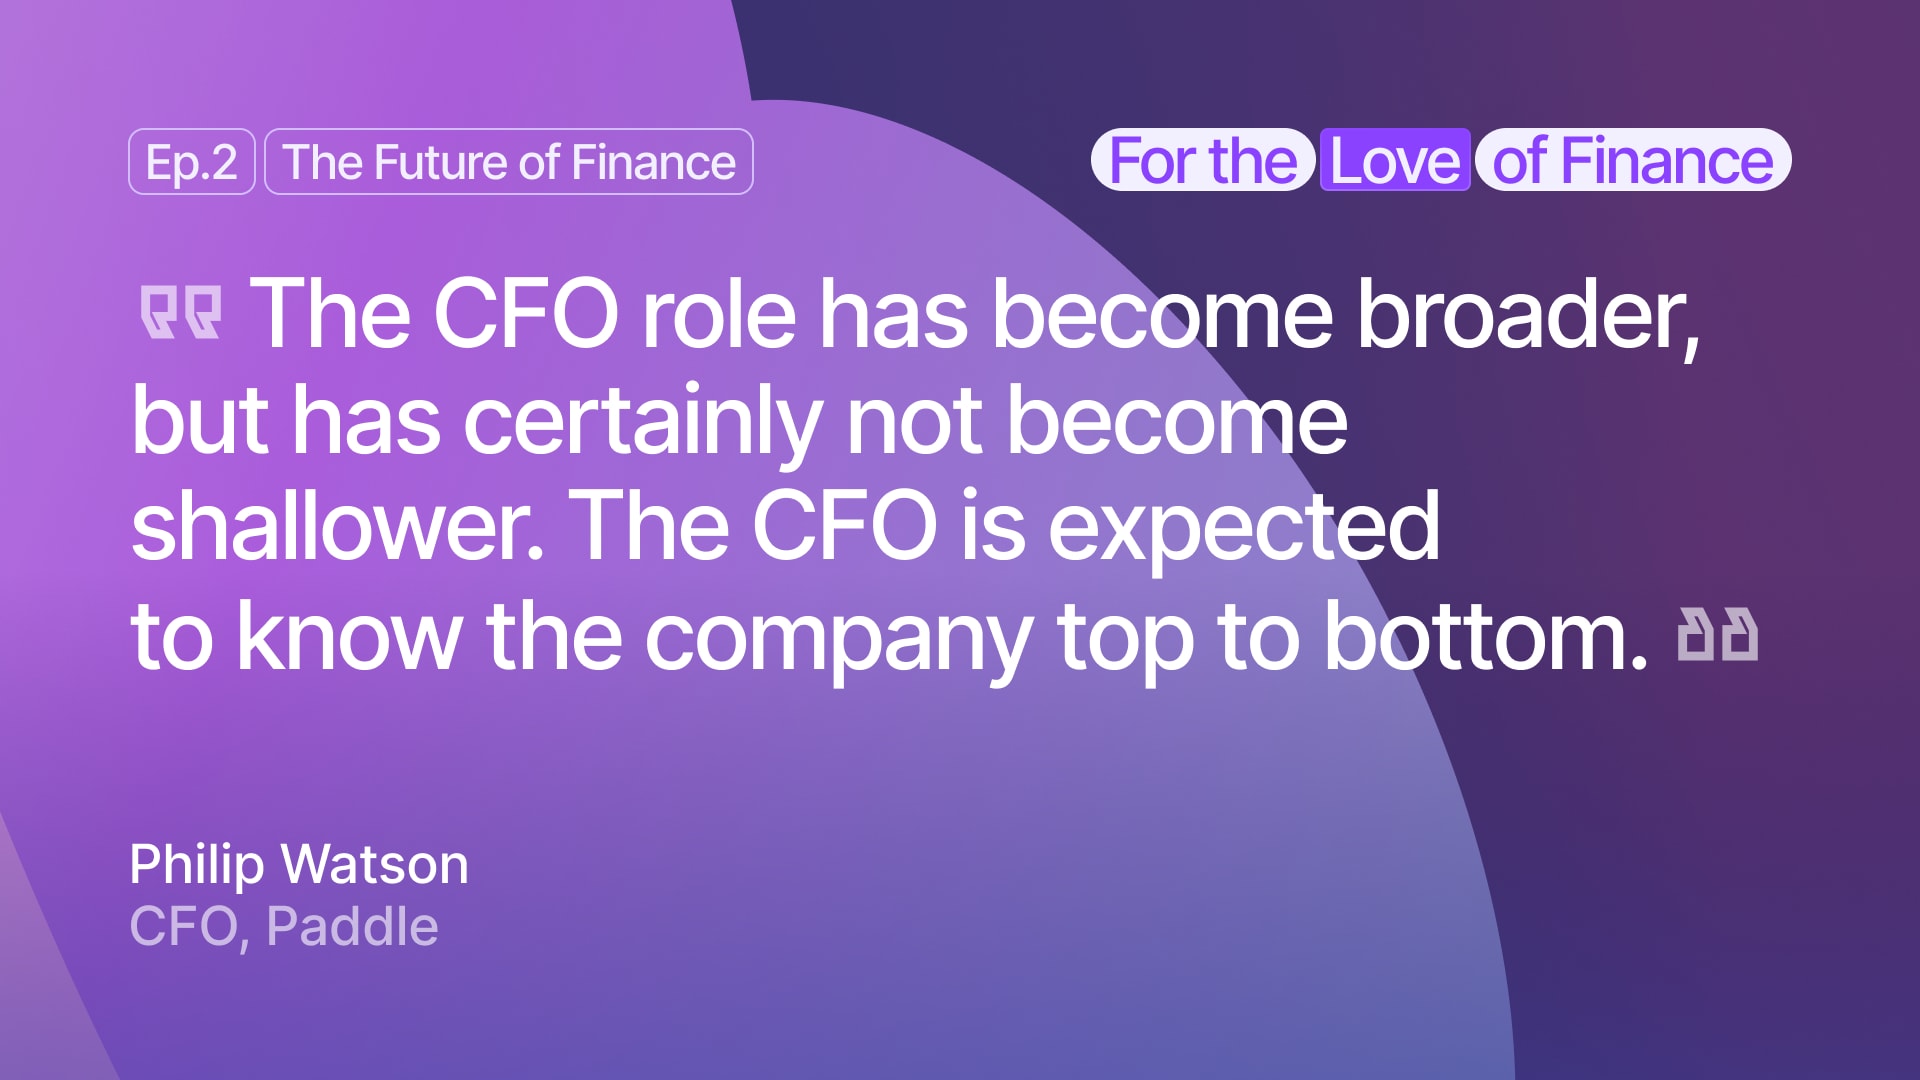 A quote from Philip Watson, Paddle, CFO, on the evolving role of the CFO